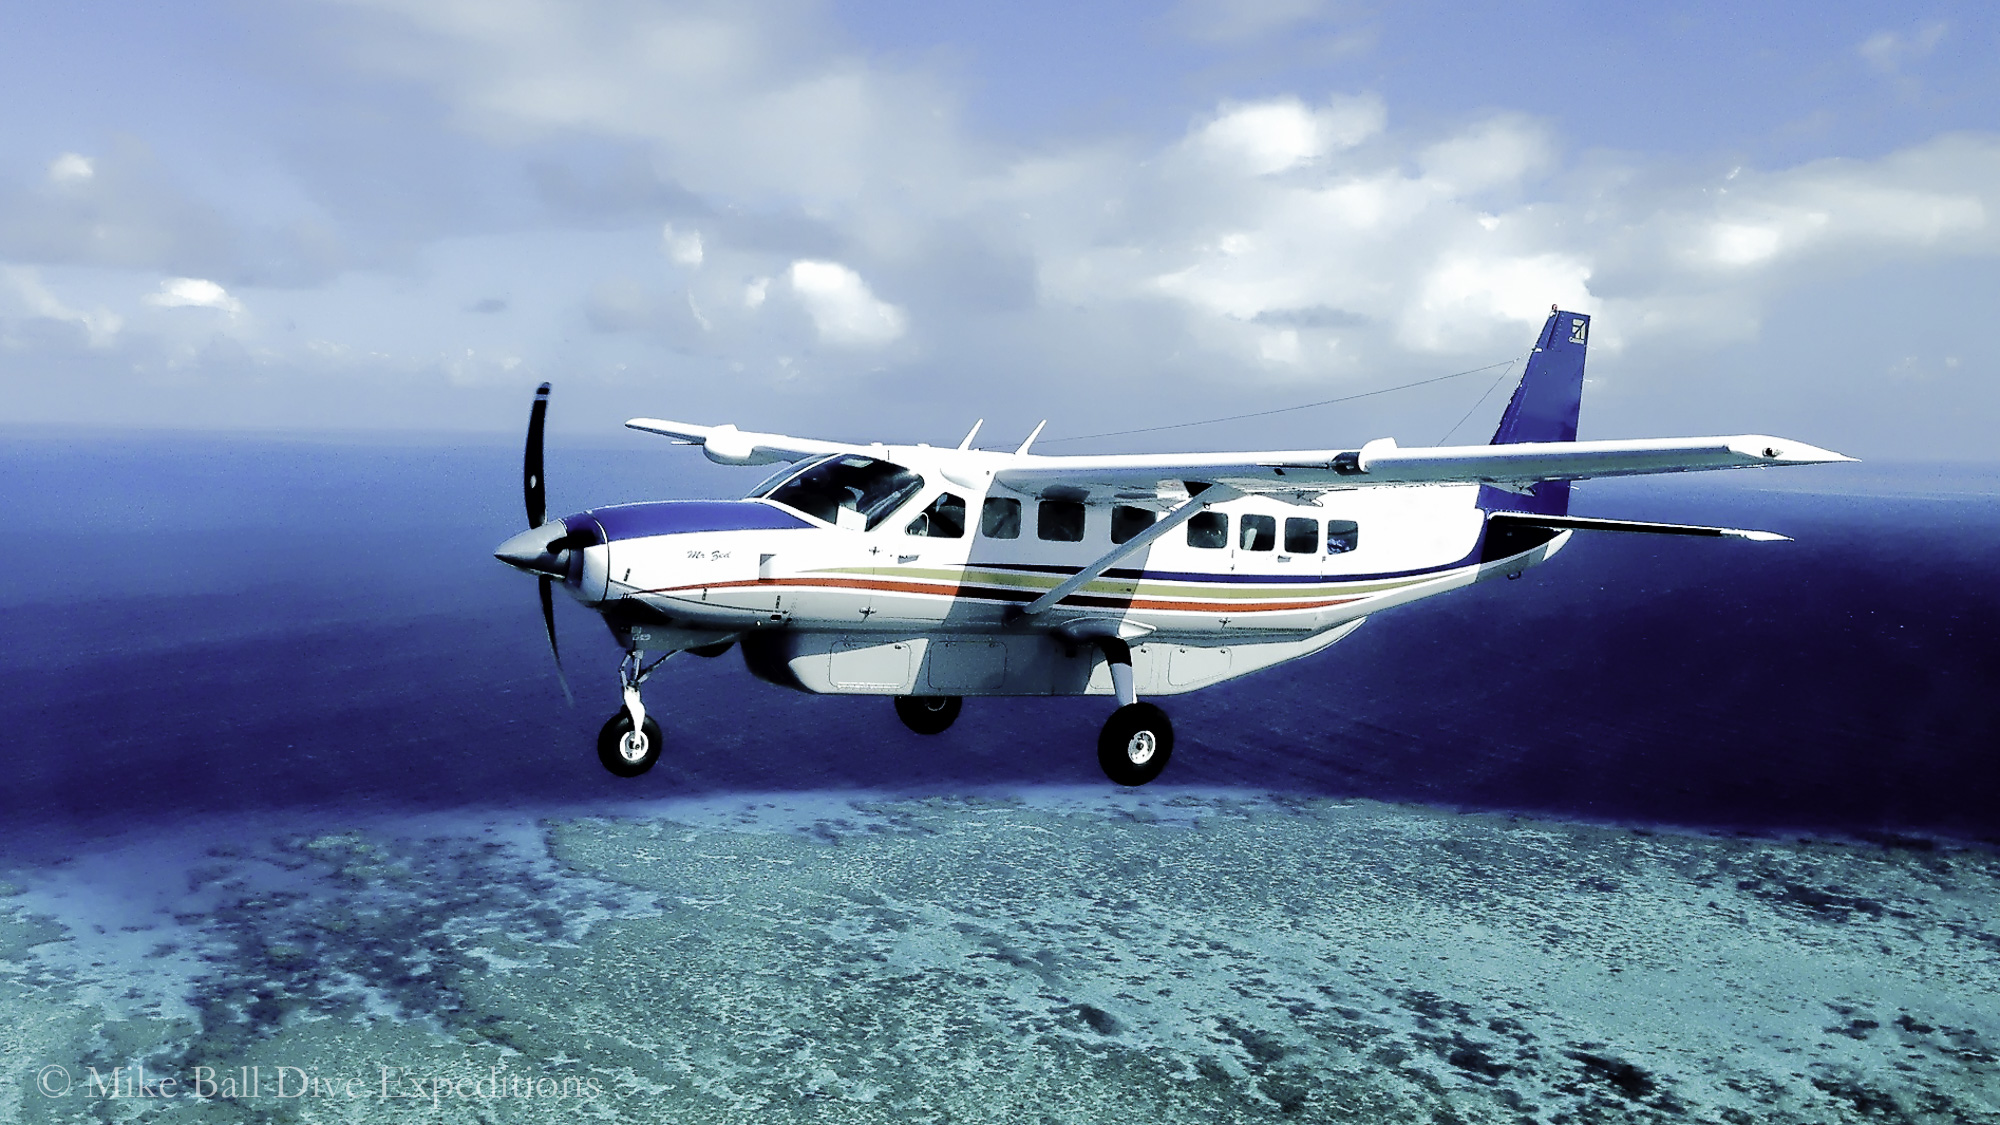 Take a low level scenic flight over the Reef to Lizard Island for a bird’s eye view of some of the reefs you’ll be diving. Captain Cook landed here in 1770, climbing to its peak to search for a way through the reefs and naming the island after the many monitor lizards that live here.